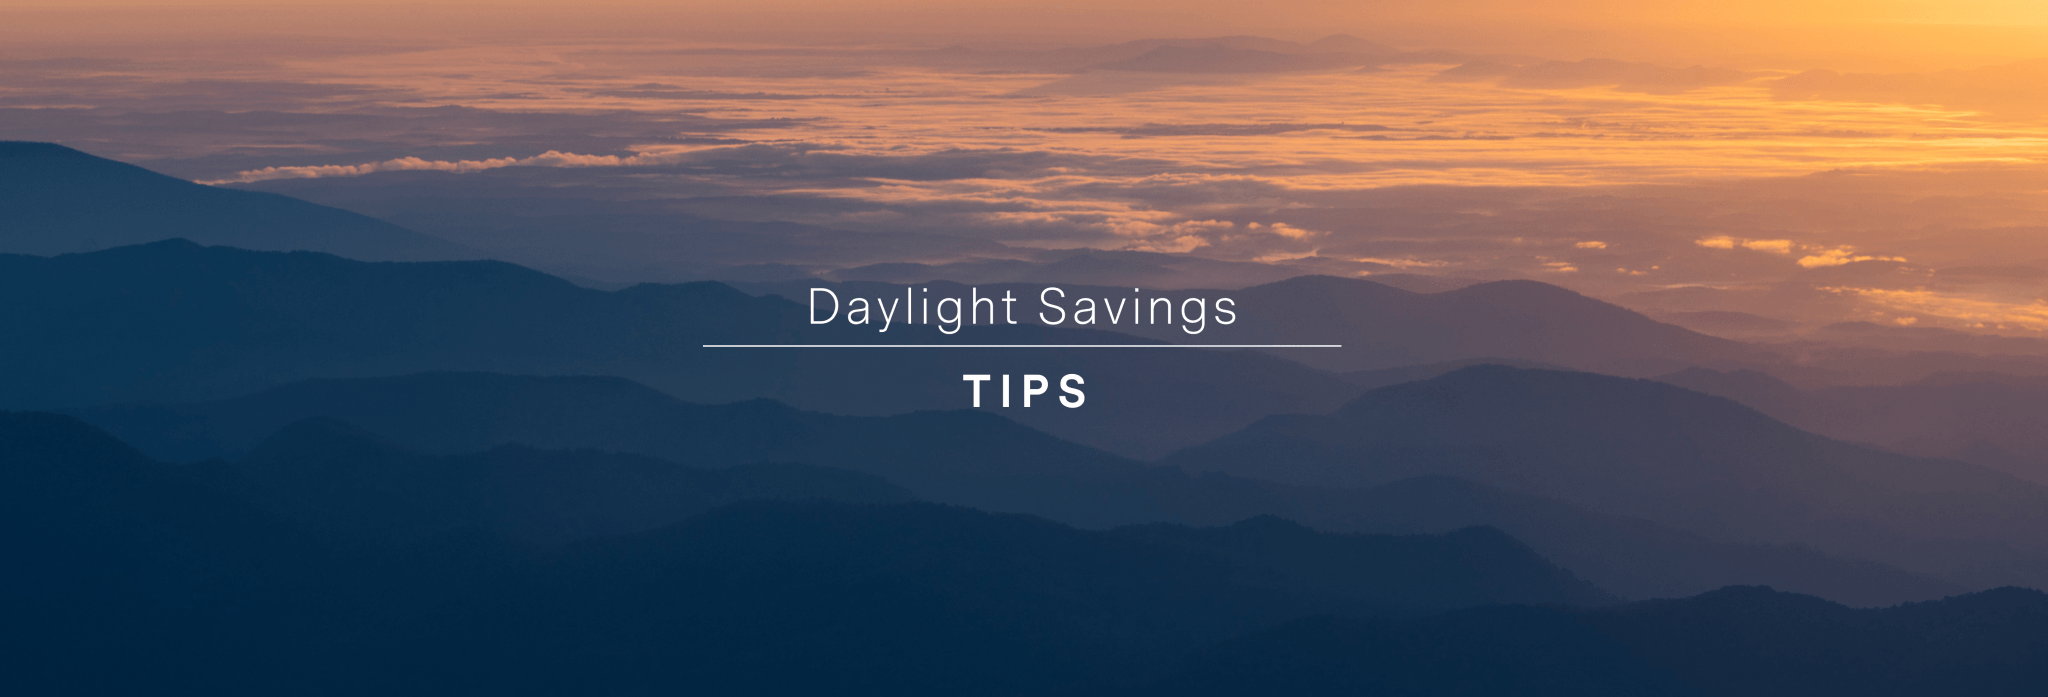 How to Prepare for Daylight Savings Time | Madefor